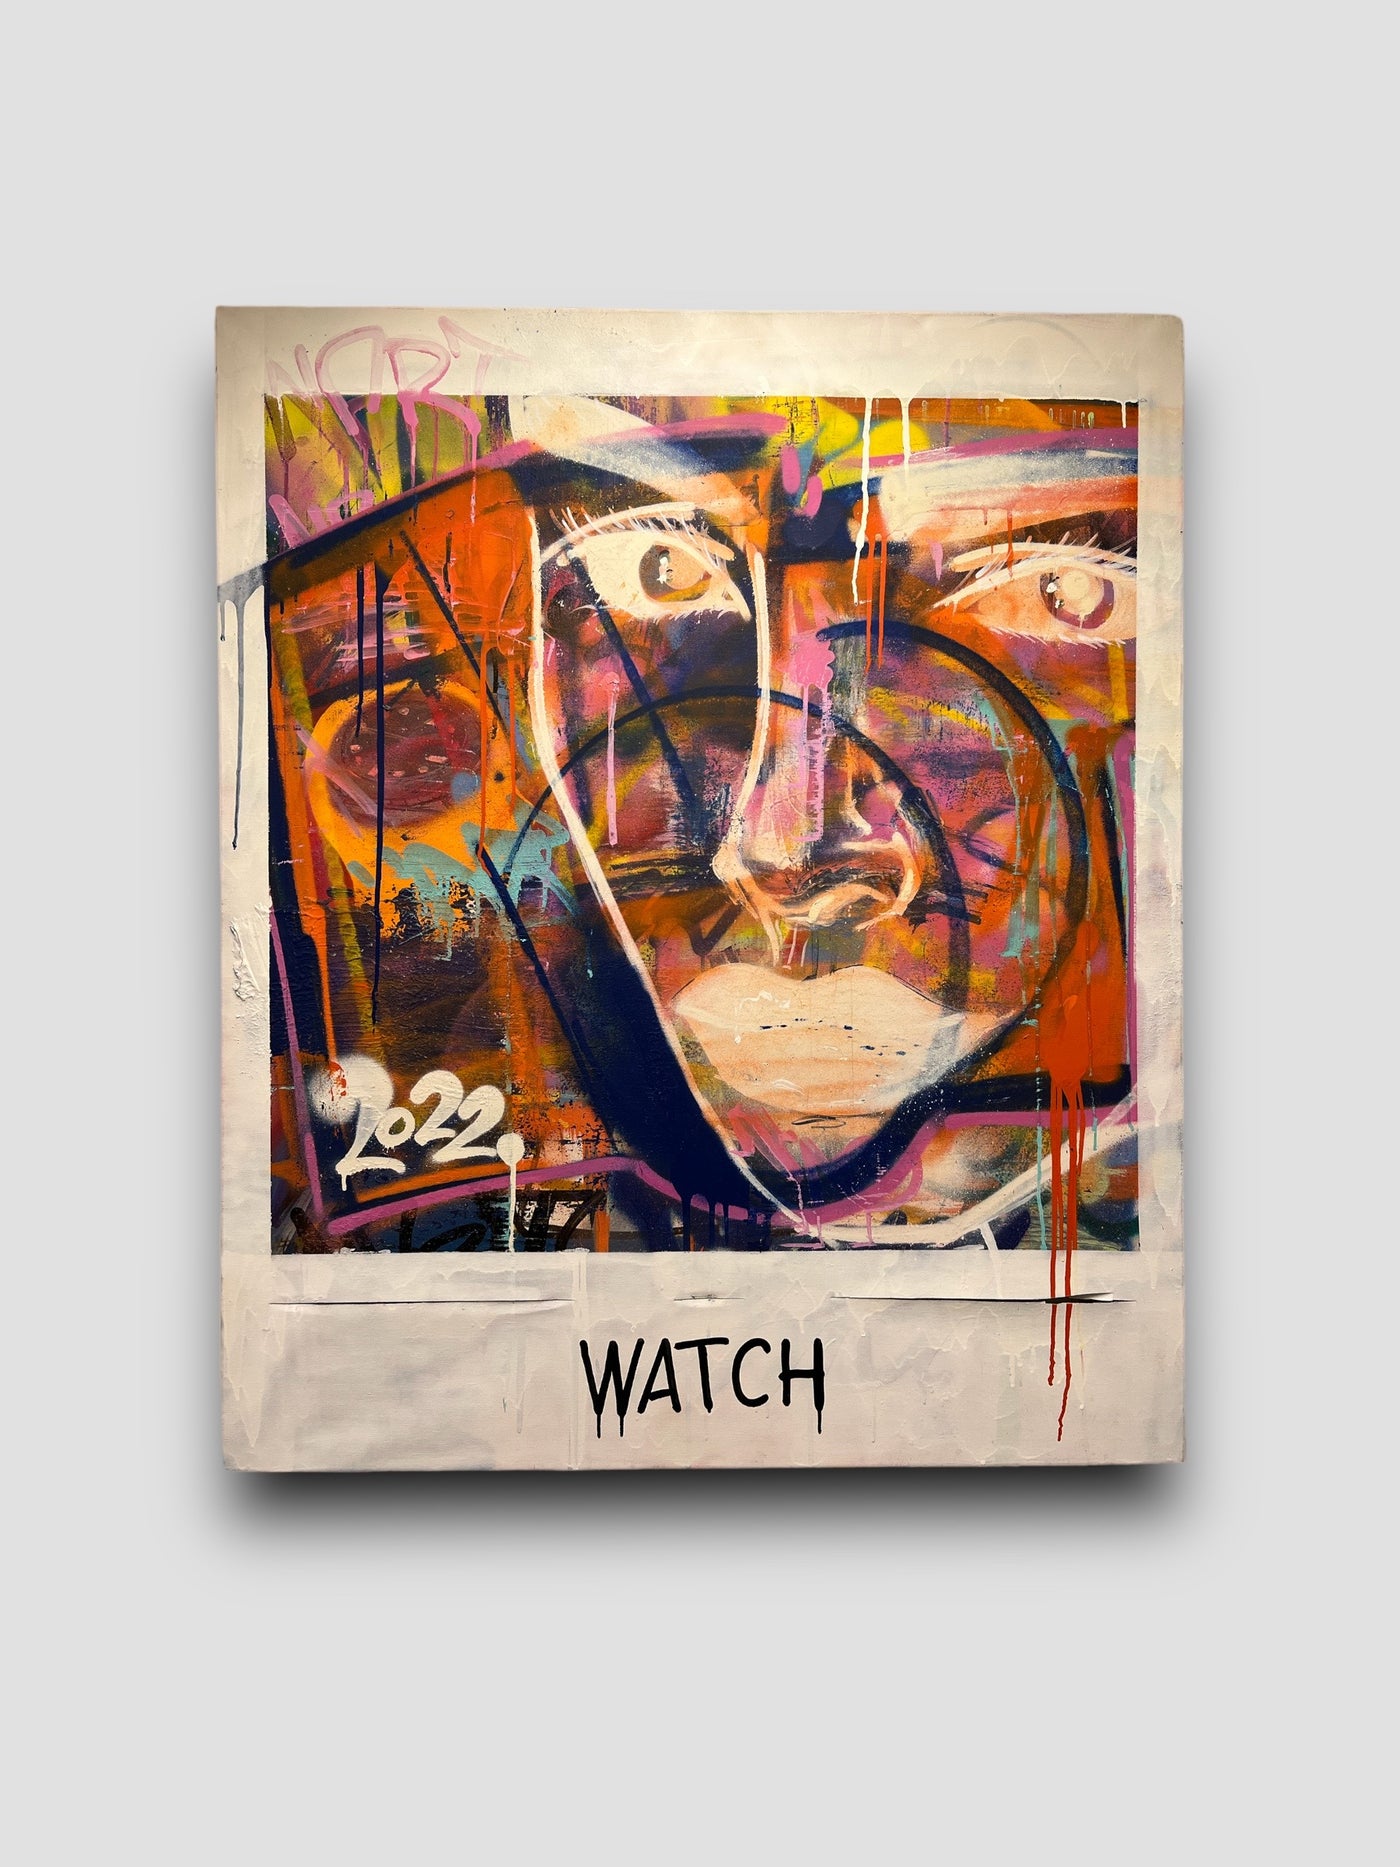 Painting of face and a watch in orange.